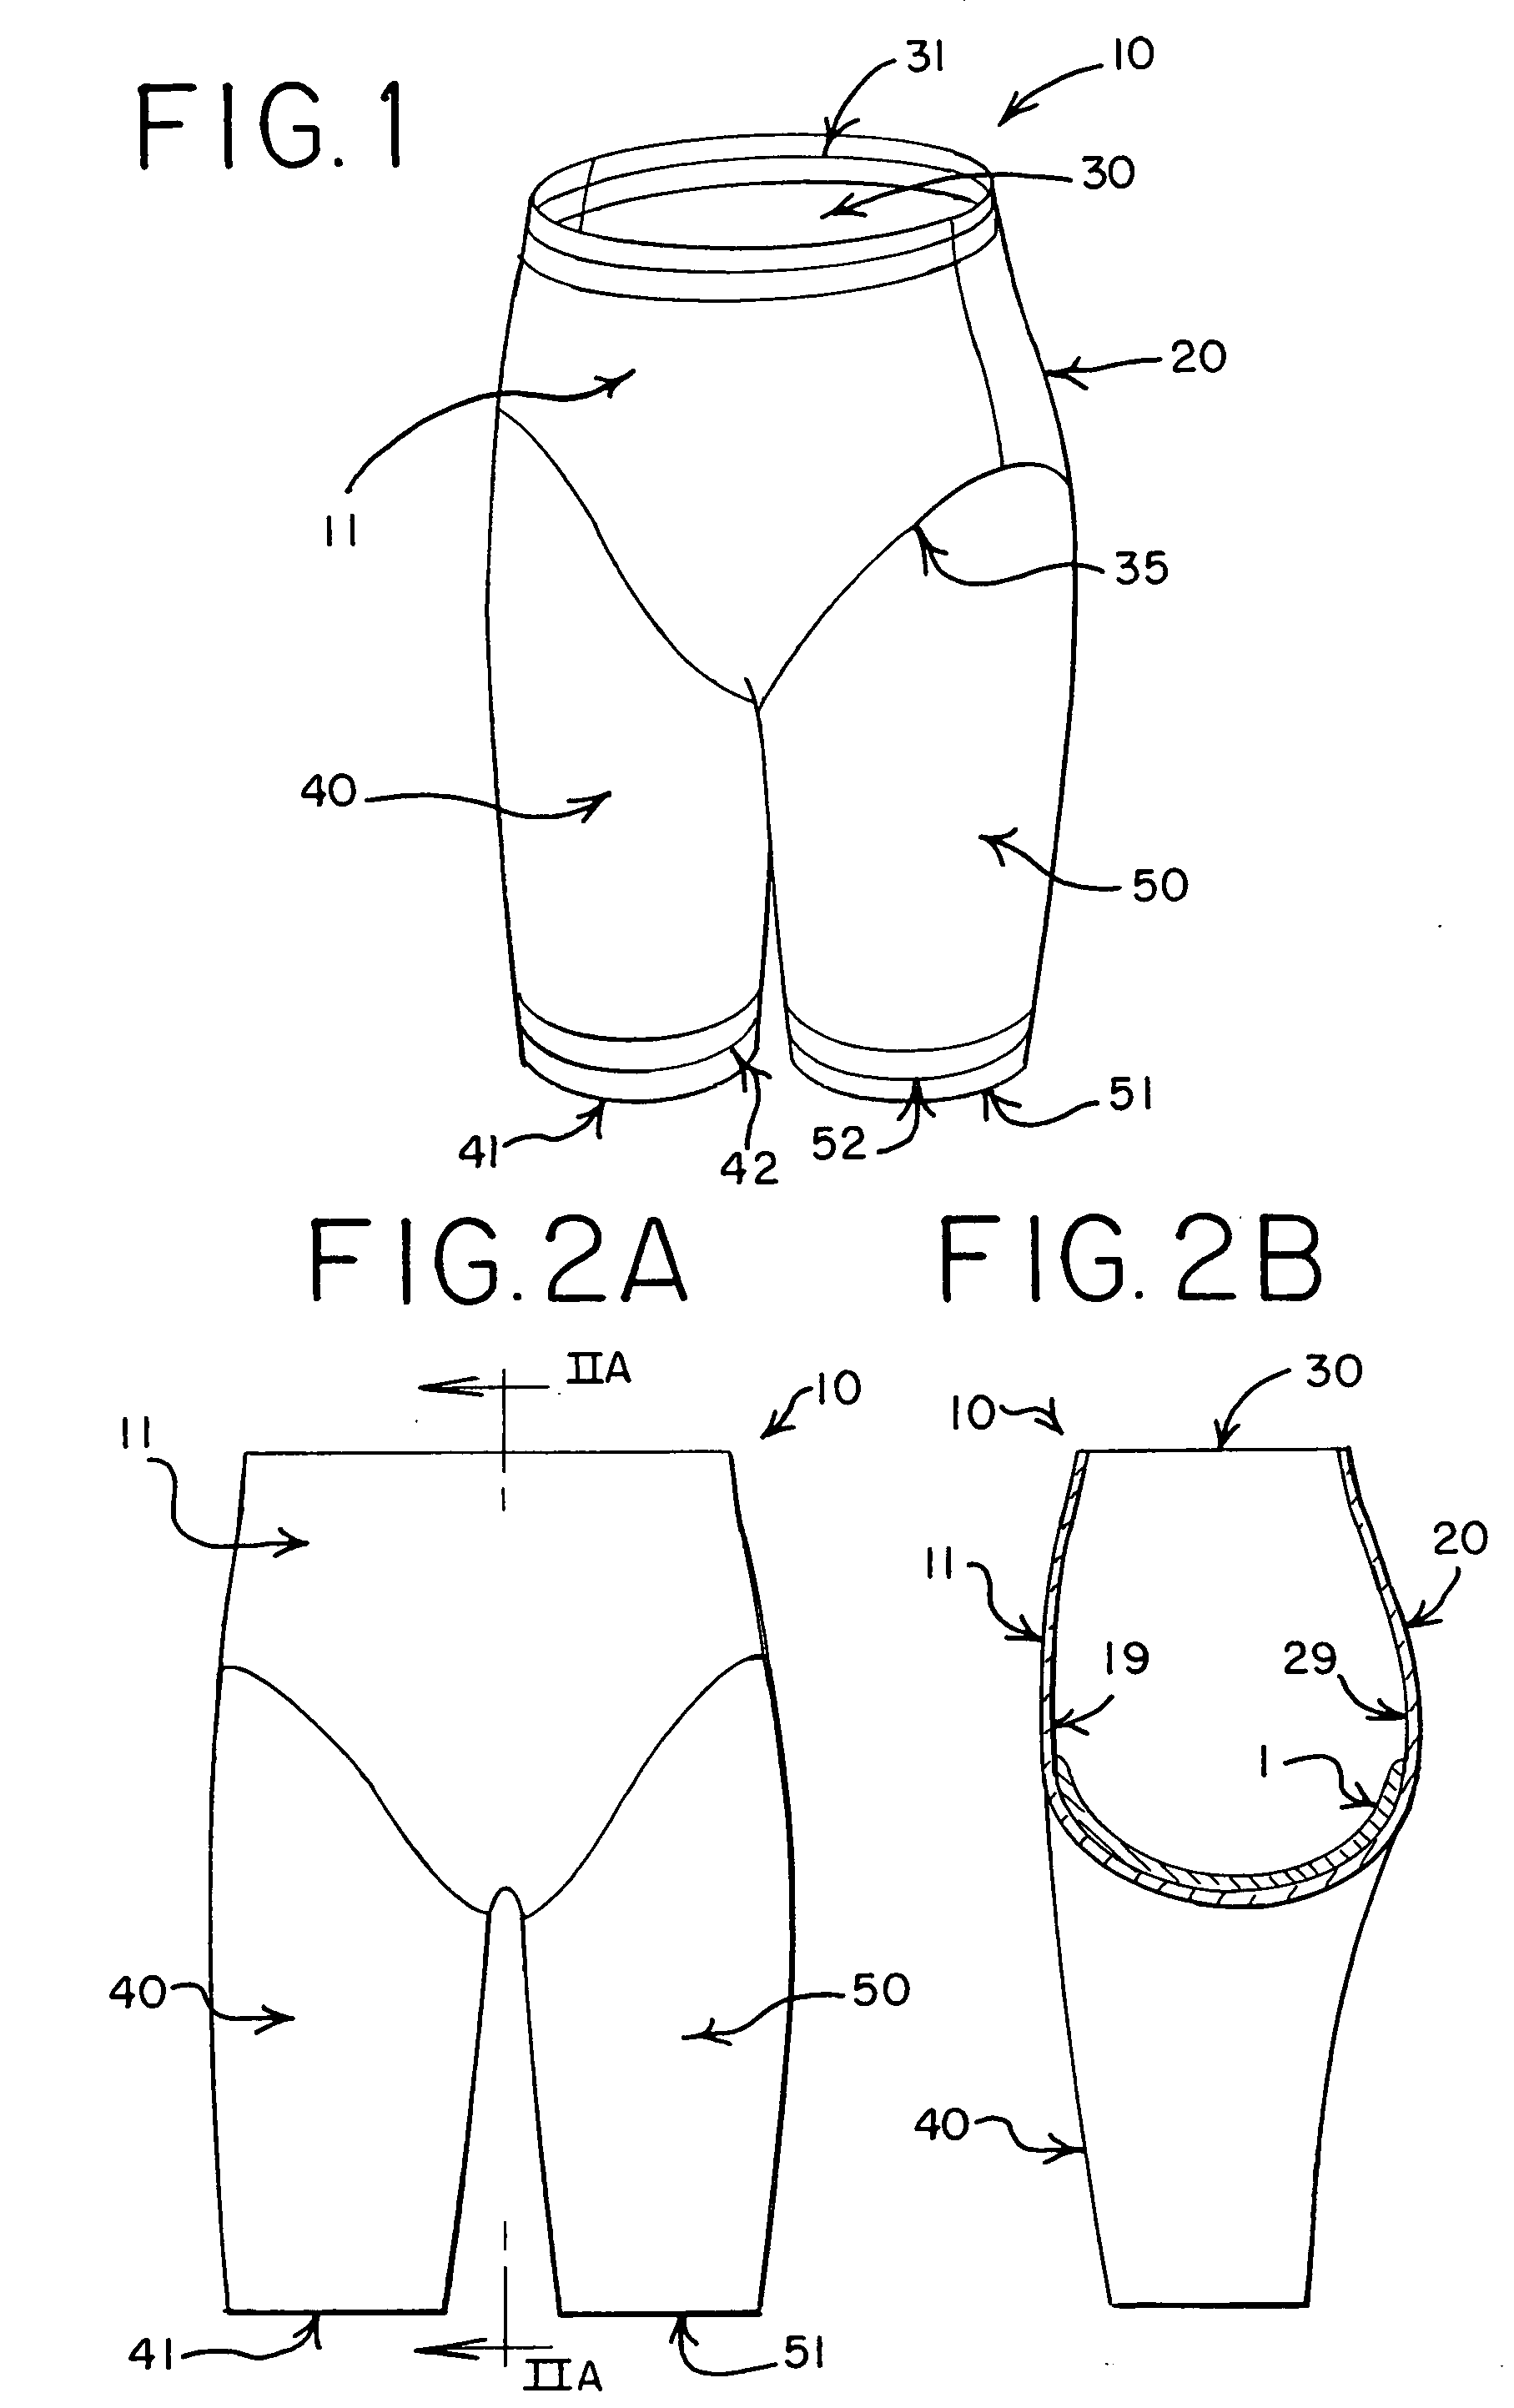 Topical medication garment and system and method for providing topical medication